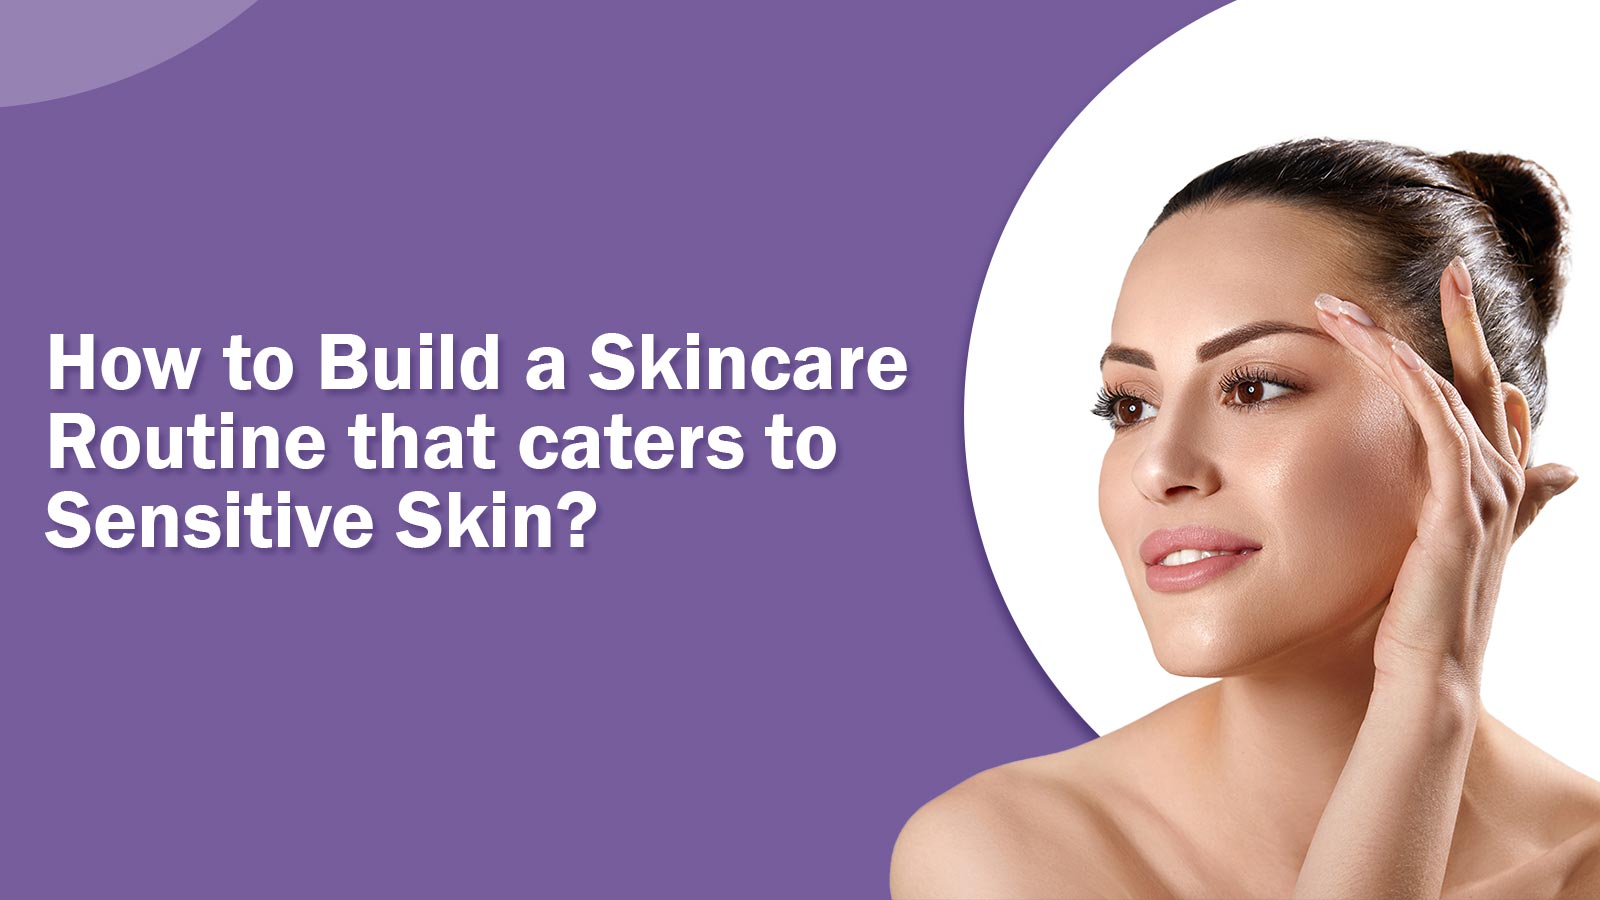 How to Build a Skincare Routine that caters to Sensitive Skin?